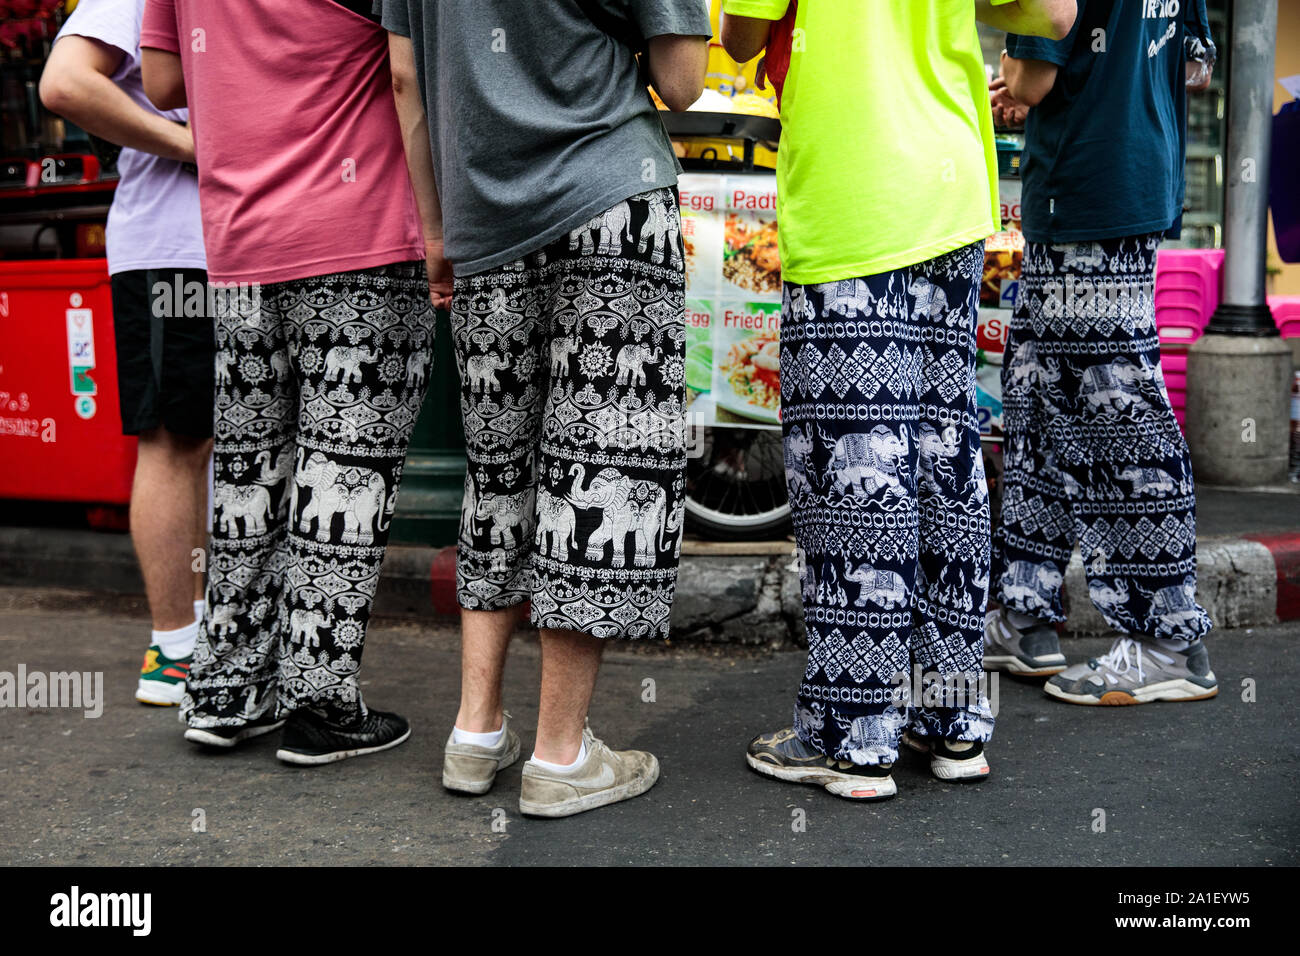 BANGKOK, THAILAND: Tourists wearing elephant-adorned trousers order food at  a stall on Khao San Road in Bangkok, Thailand on August 22nd, 2019.  Bangkok's bustling Khao San Road - a strip famous among